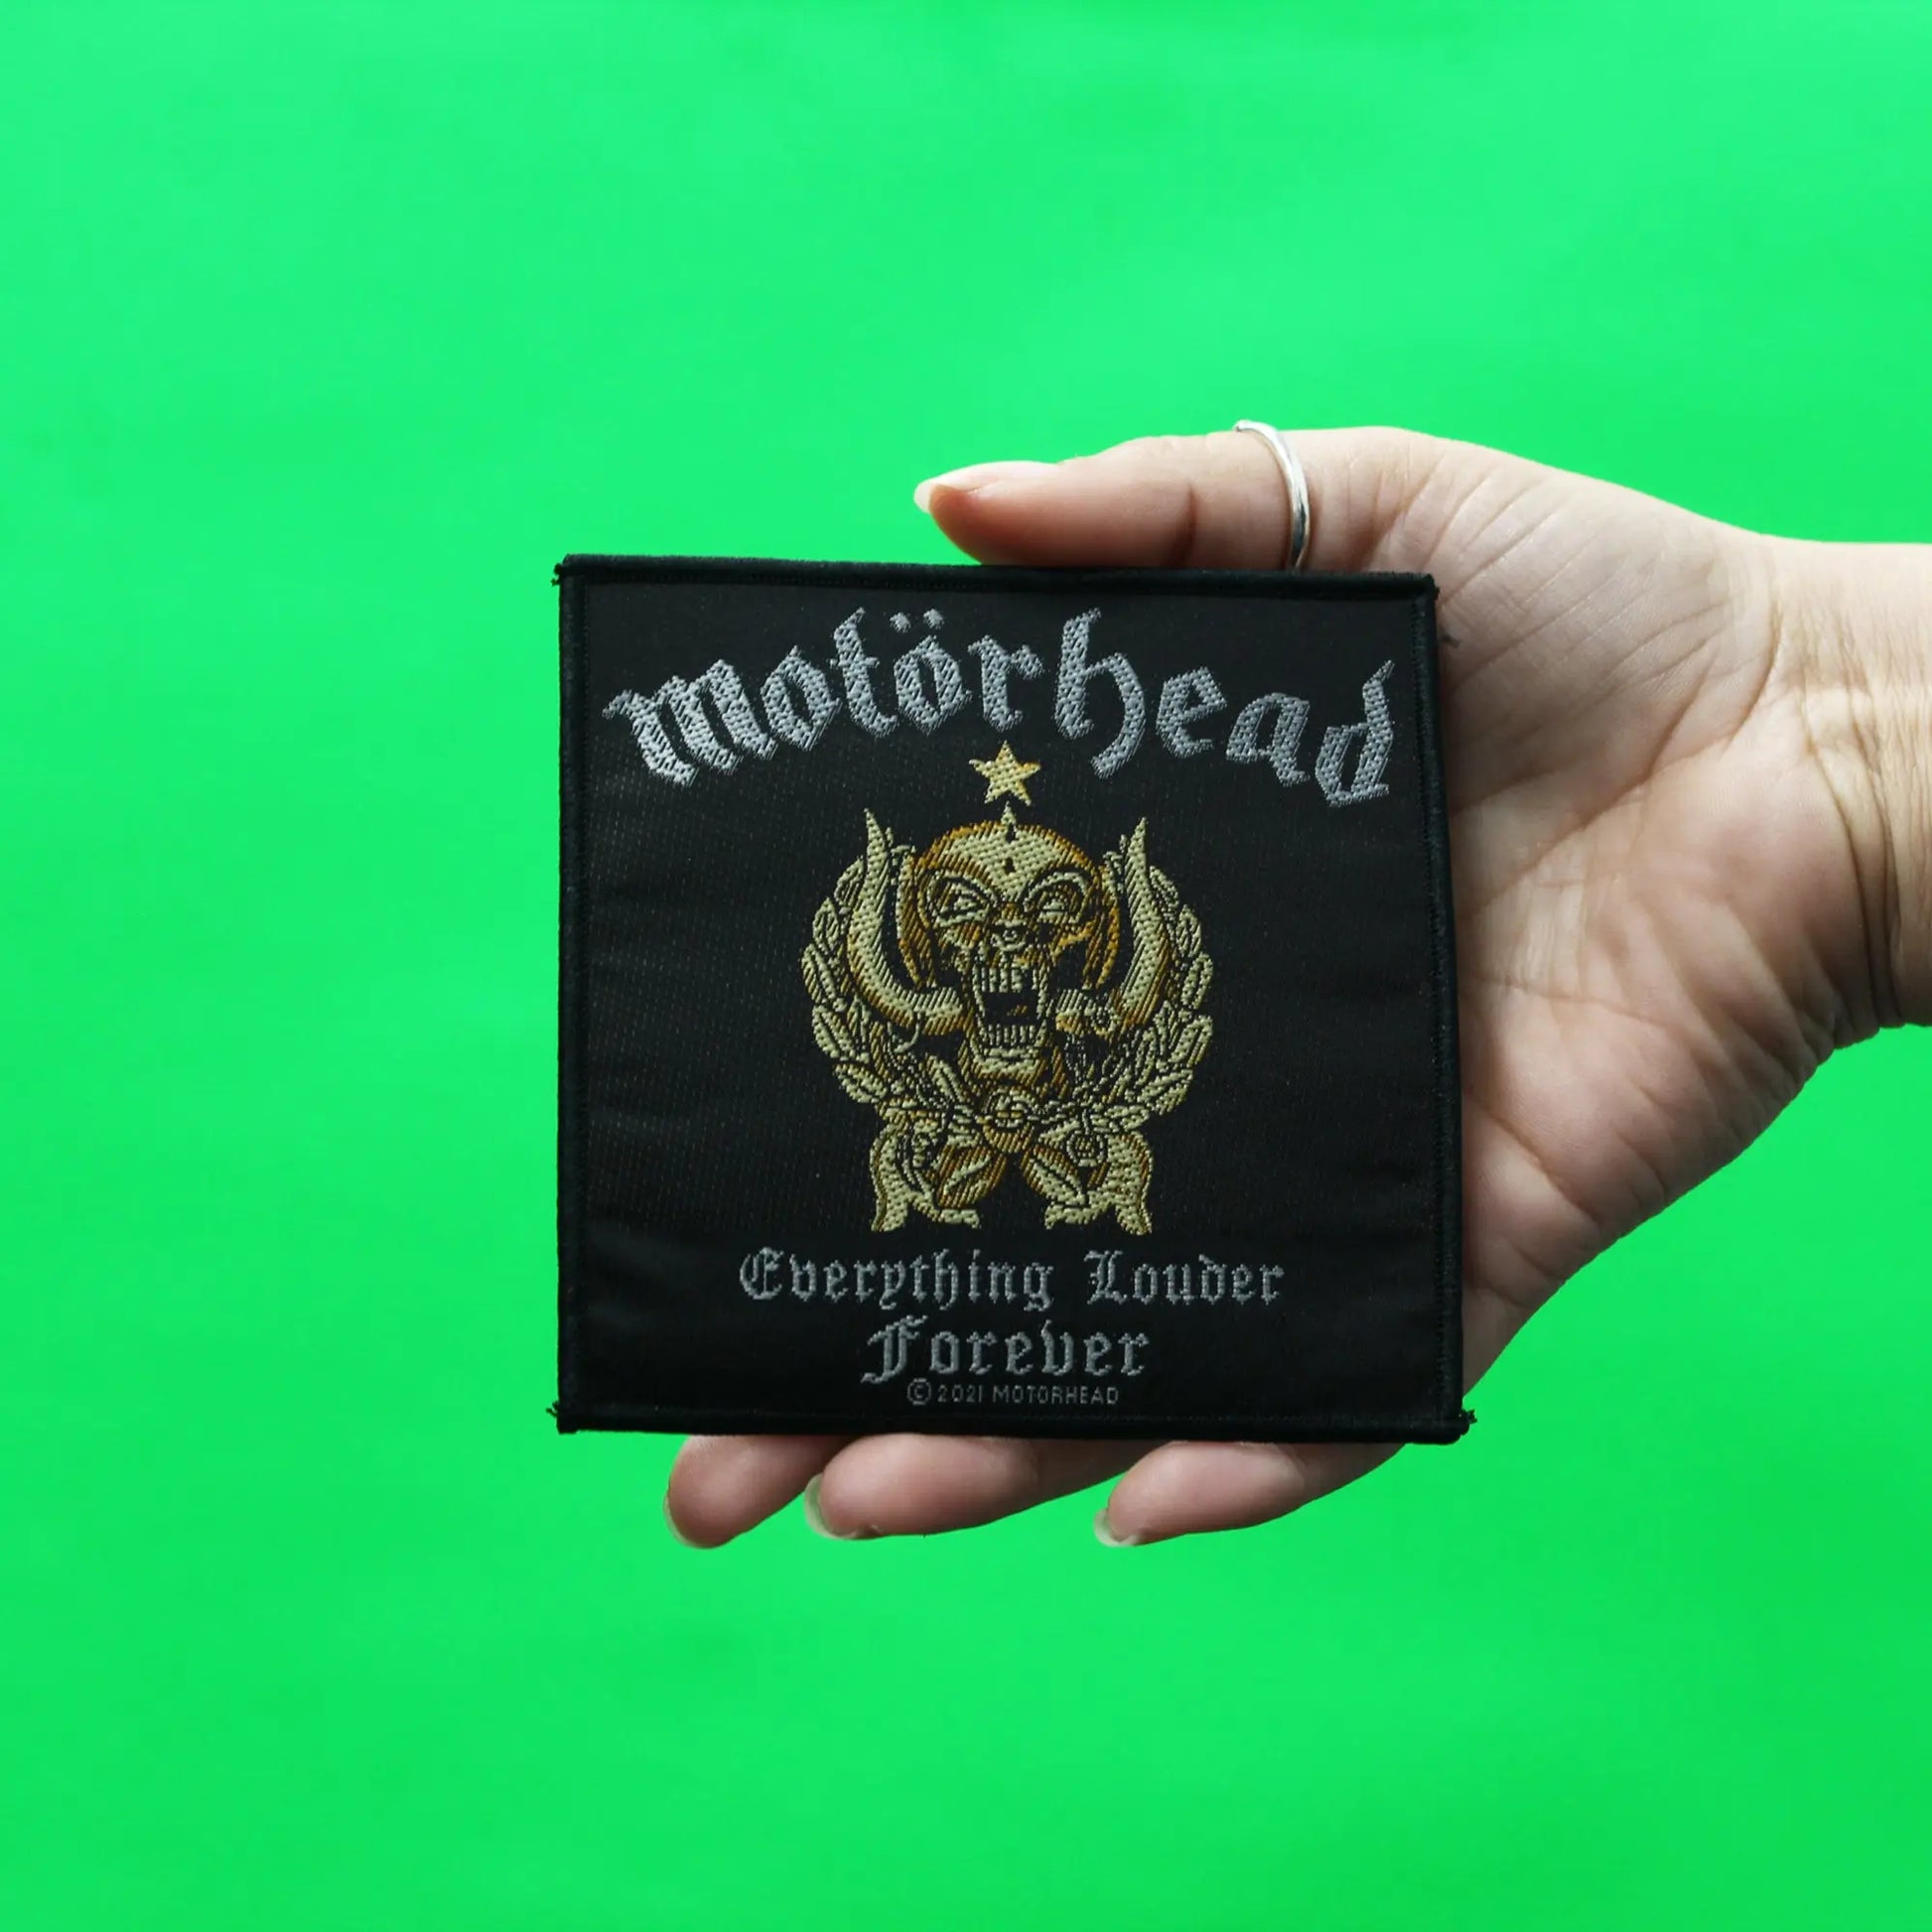 Motorhead Everything Louder Forever Patch 2021 Album Cover Sew On 